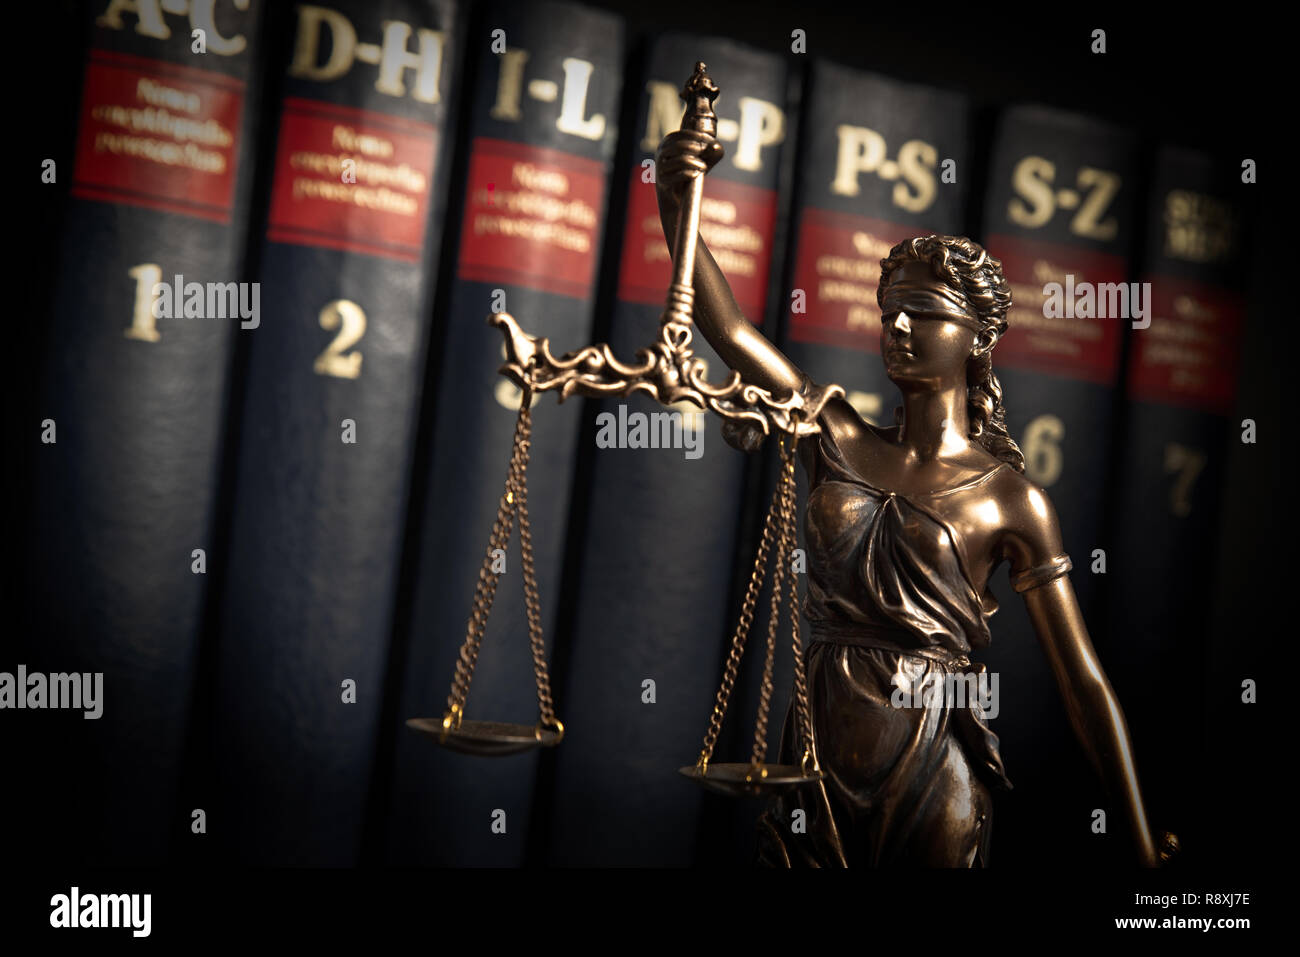 Lady justice, themis, statue of justice on books background. Law concept with justice figurine in library Stock Photo